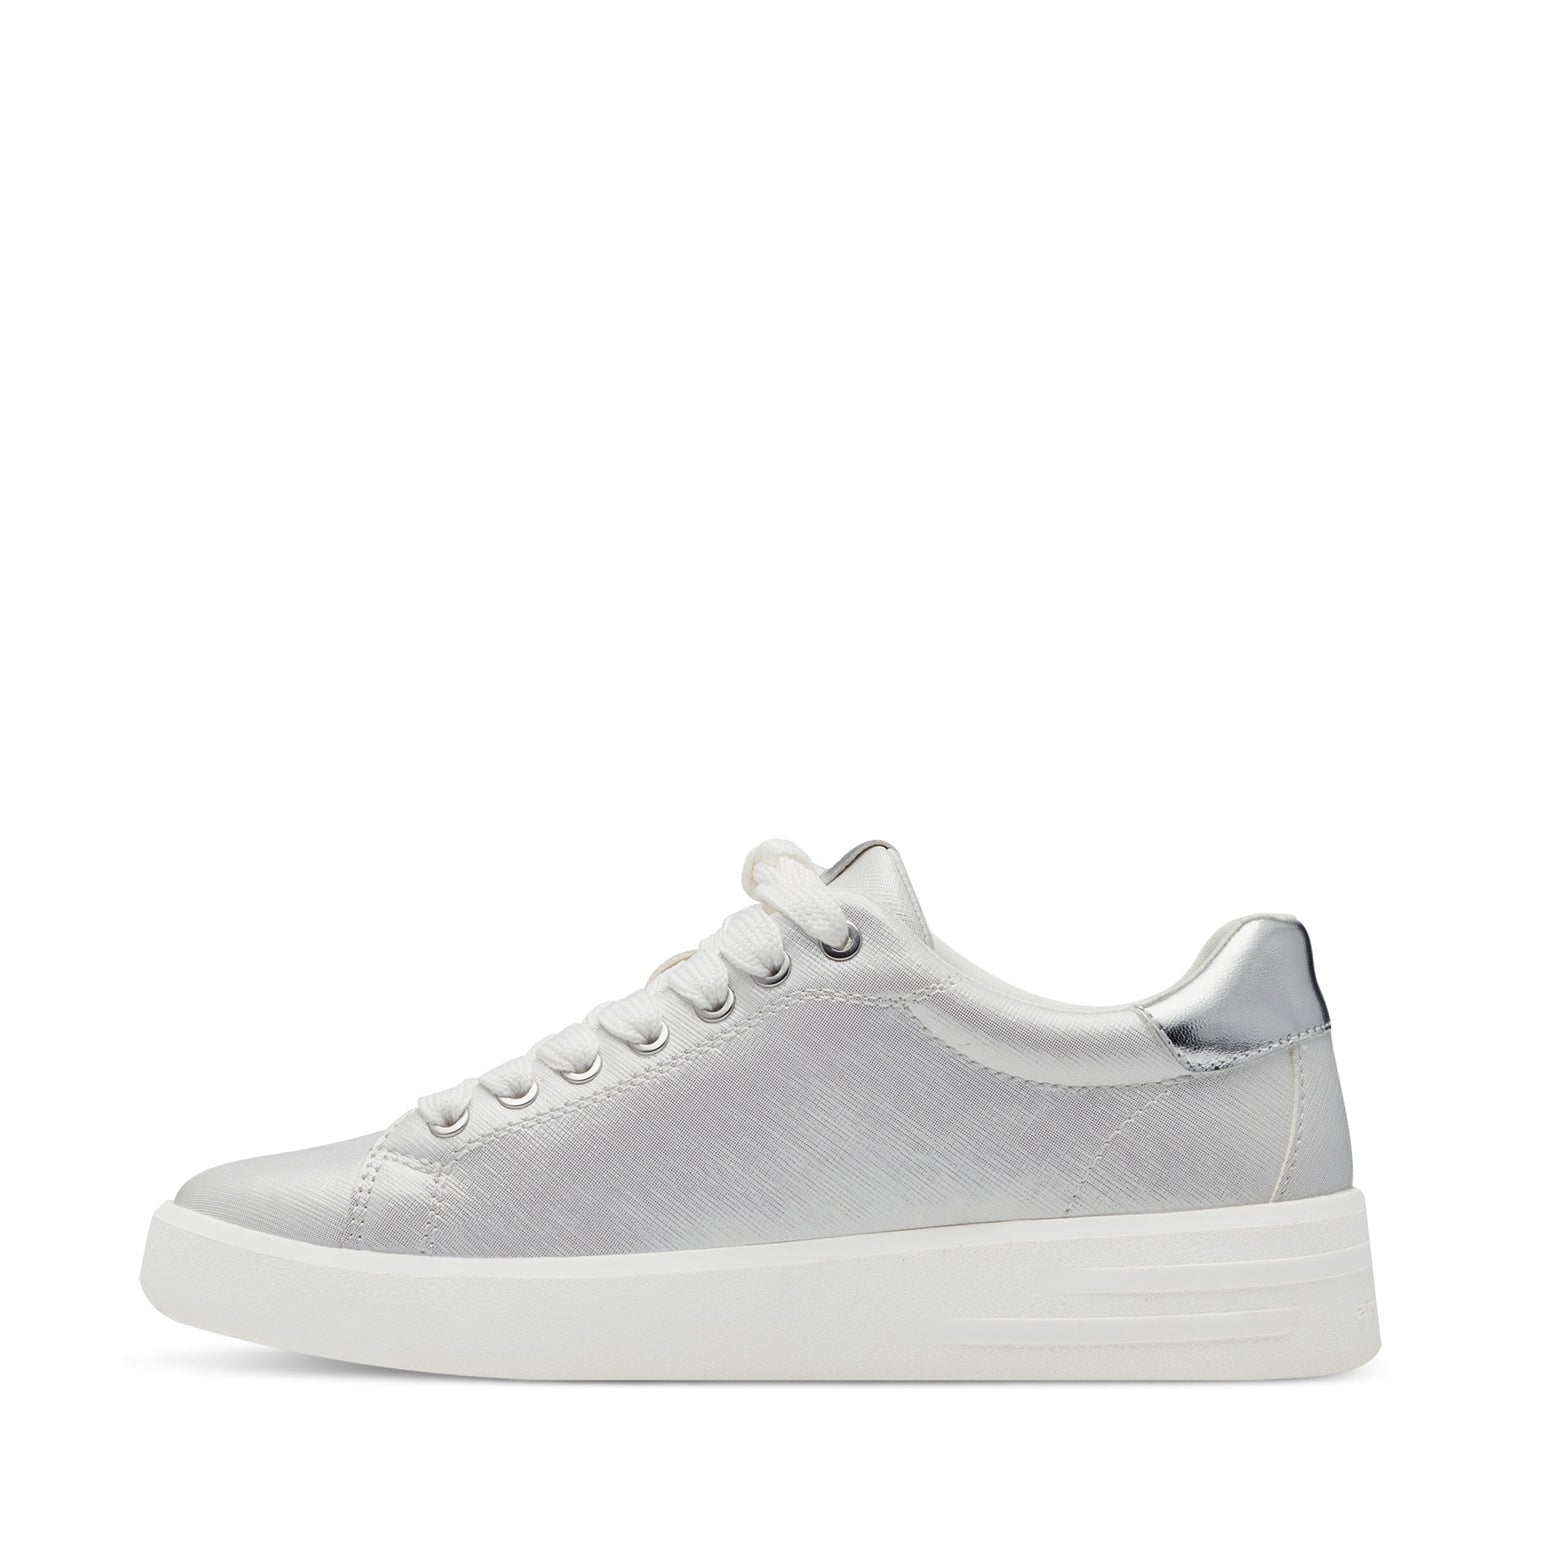 Tamaris Laced Trainer White/Silver